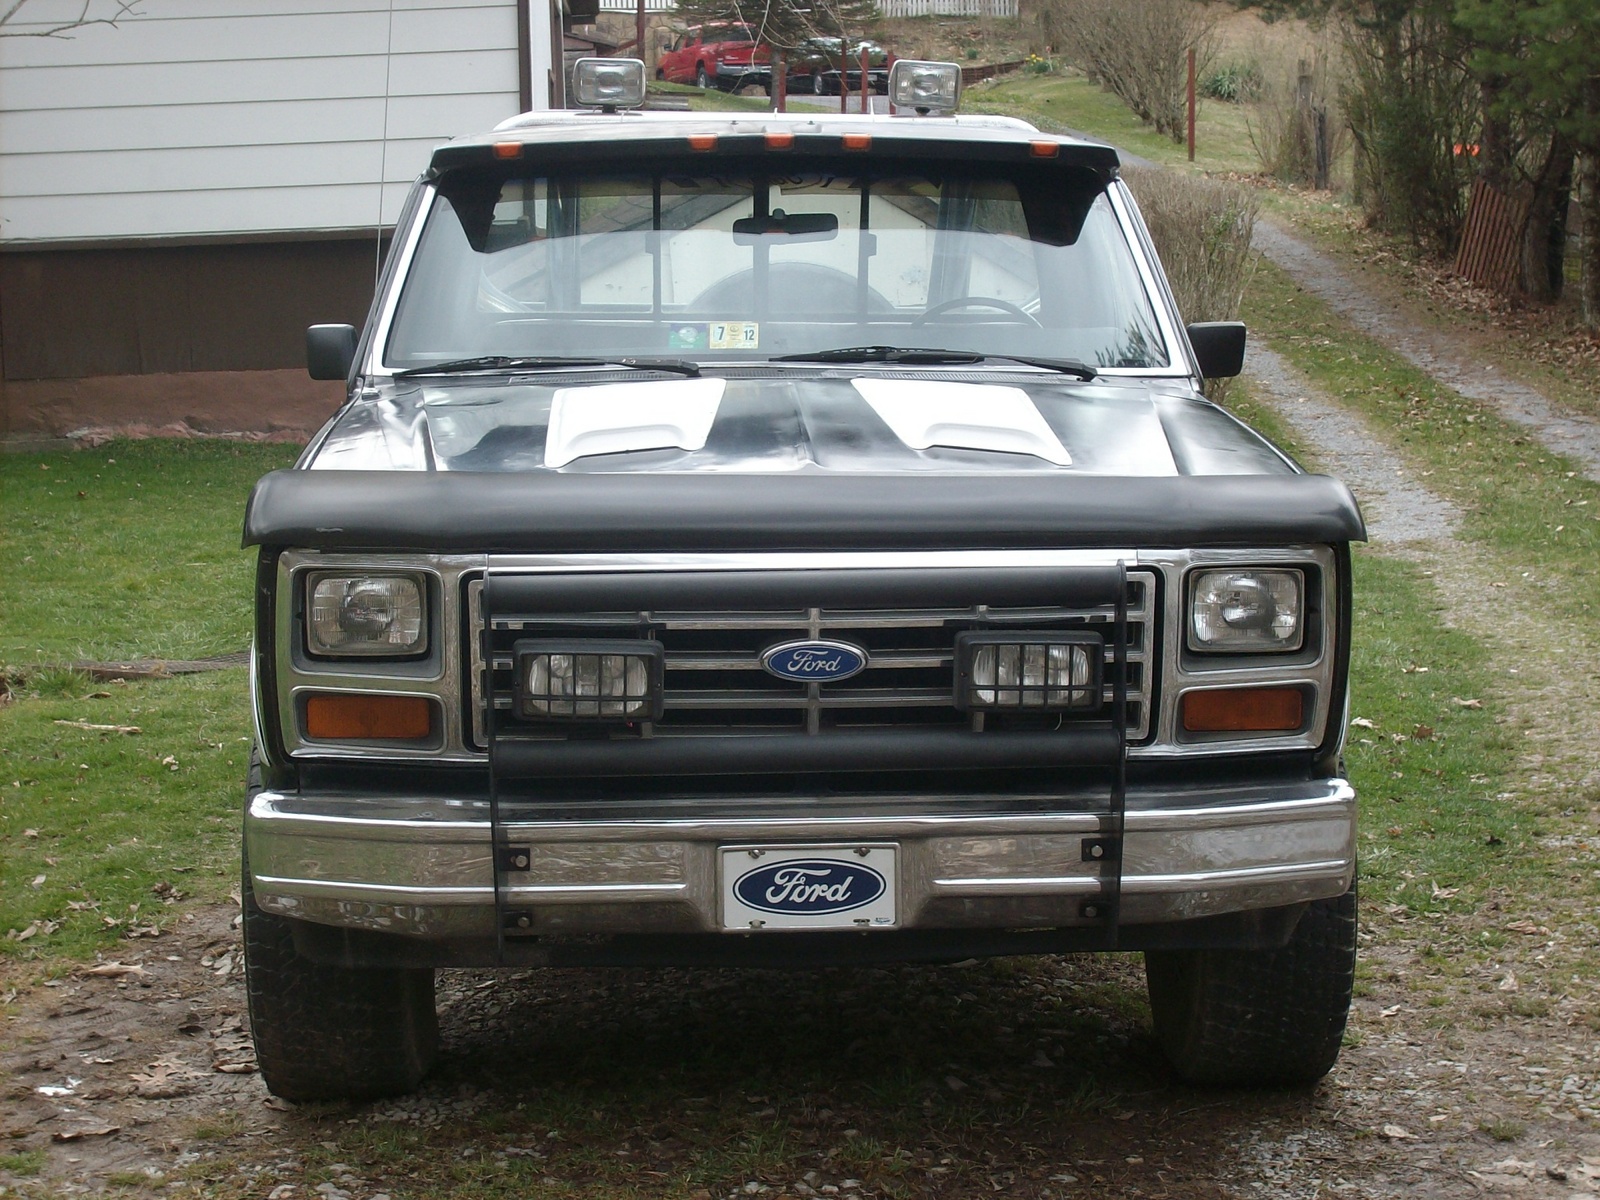 1981 Ford f150 review #2